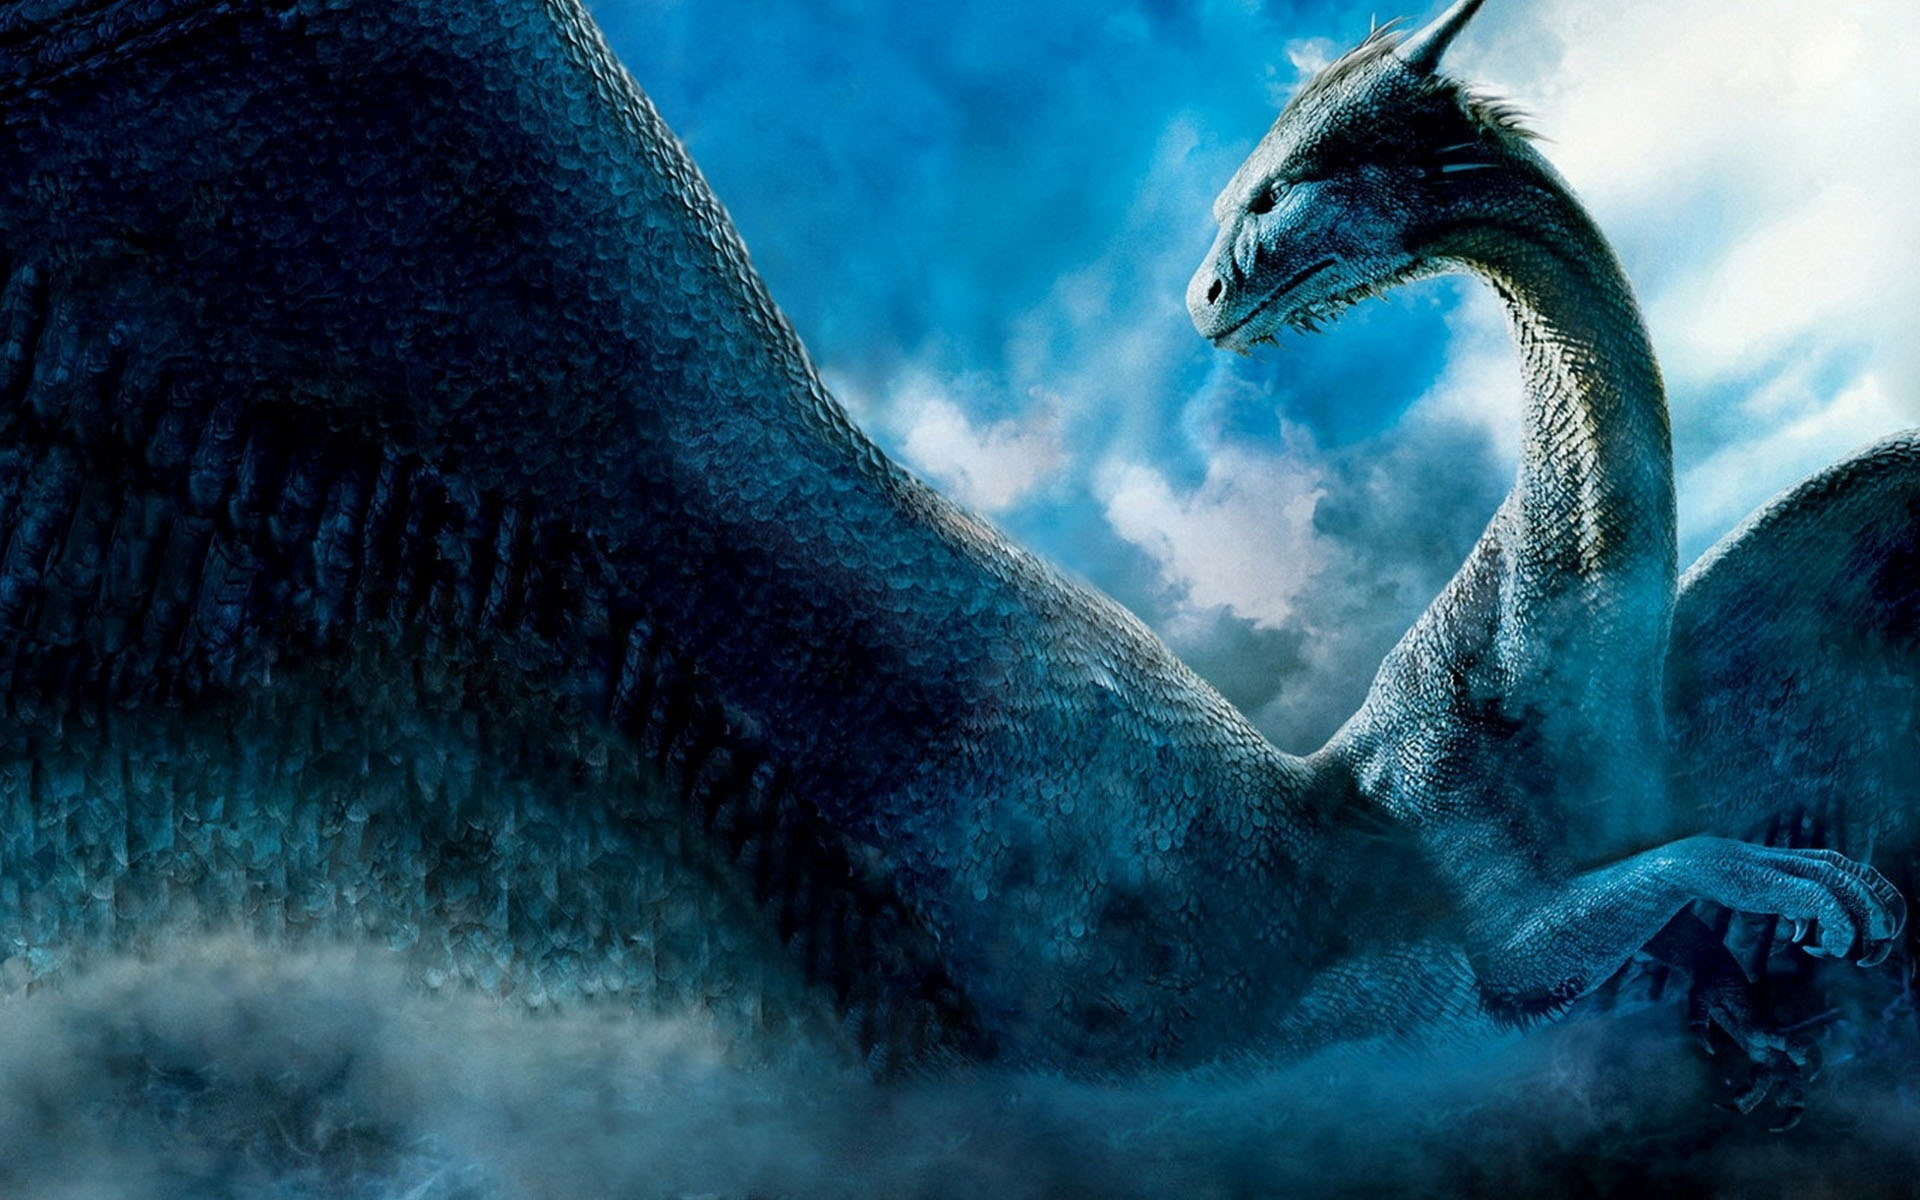 blue dragon here be other mythical creatures HD Wallpaper of Wild 1920x1200